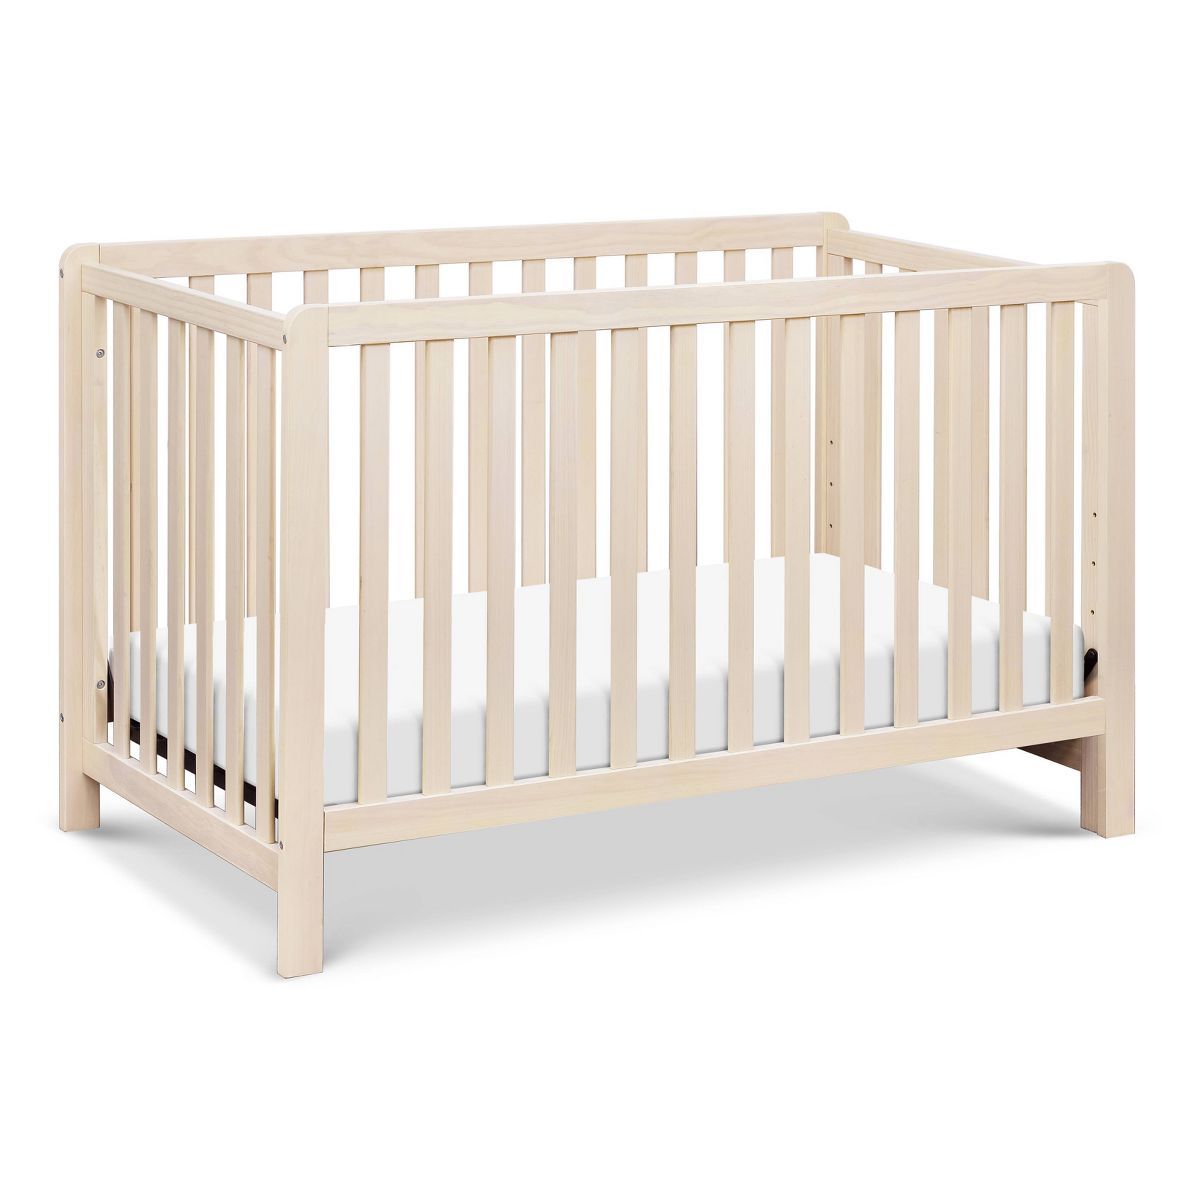 Carter's by DaVinci Colby 4-in-1 Low-profile Convertible Crib - Washed Natural | Target